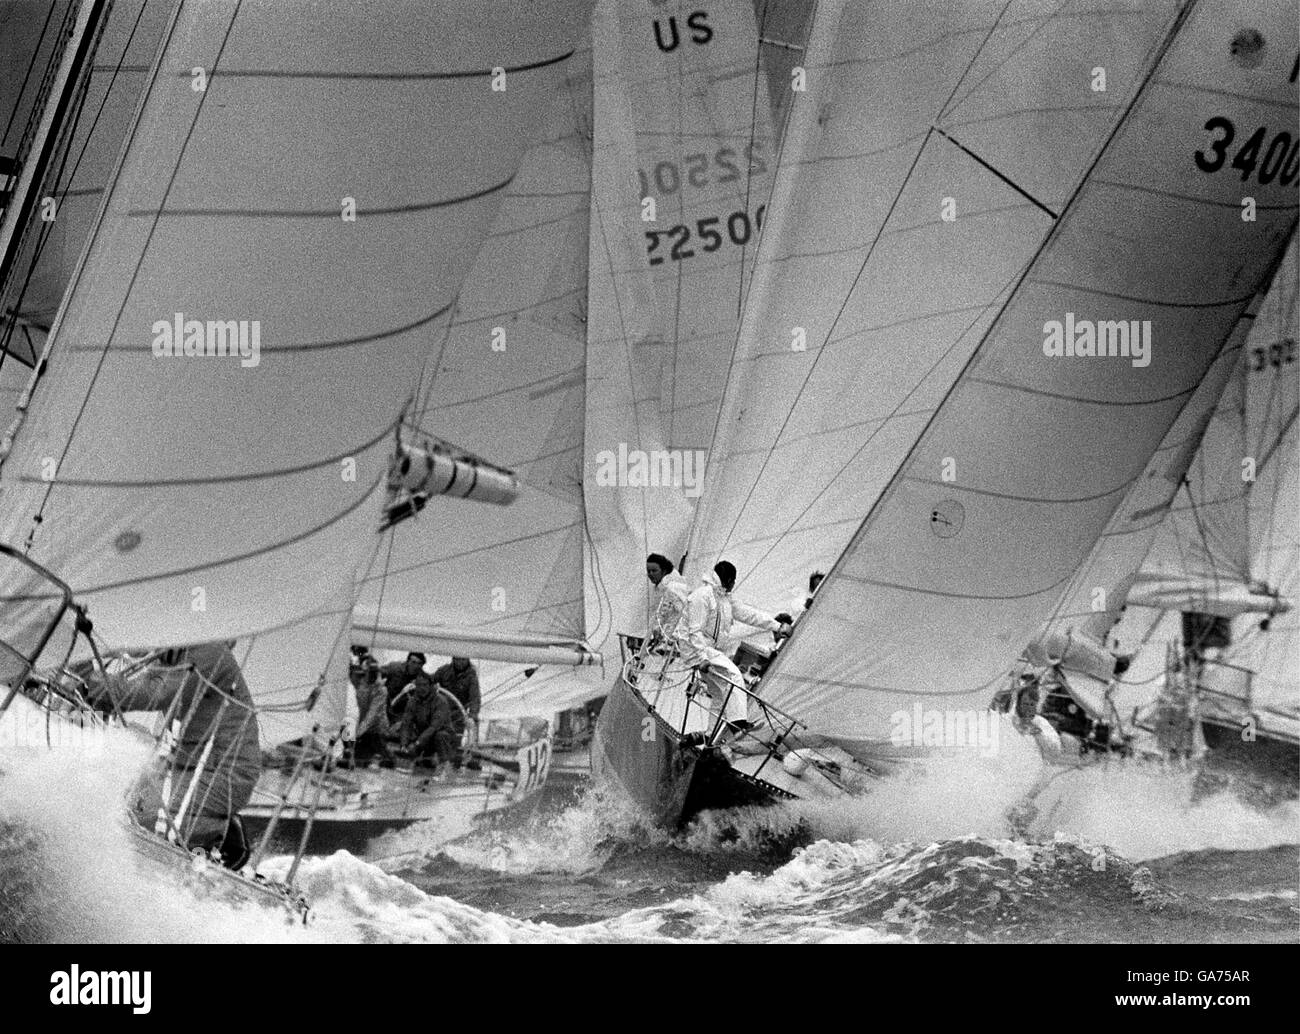 AJAXNETPHOTO. JULY,1979. COWES, ENGLAND. - ADMIRAL'S CUP -  START OF THE FIRST INSHORE RACE ON THE ROYAL YACHT SQUADRON LINE OFF COWES. PHOTO:JONATHAN EASTLAND/AJAX  REF:RYS 79 Stock Photo